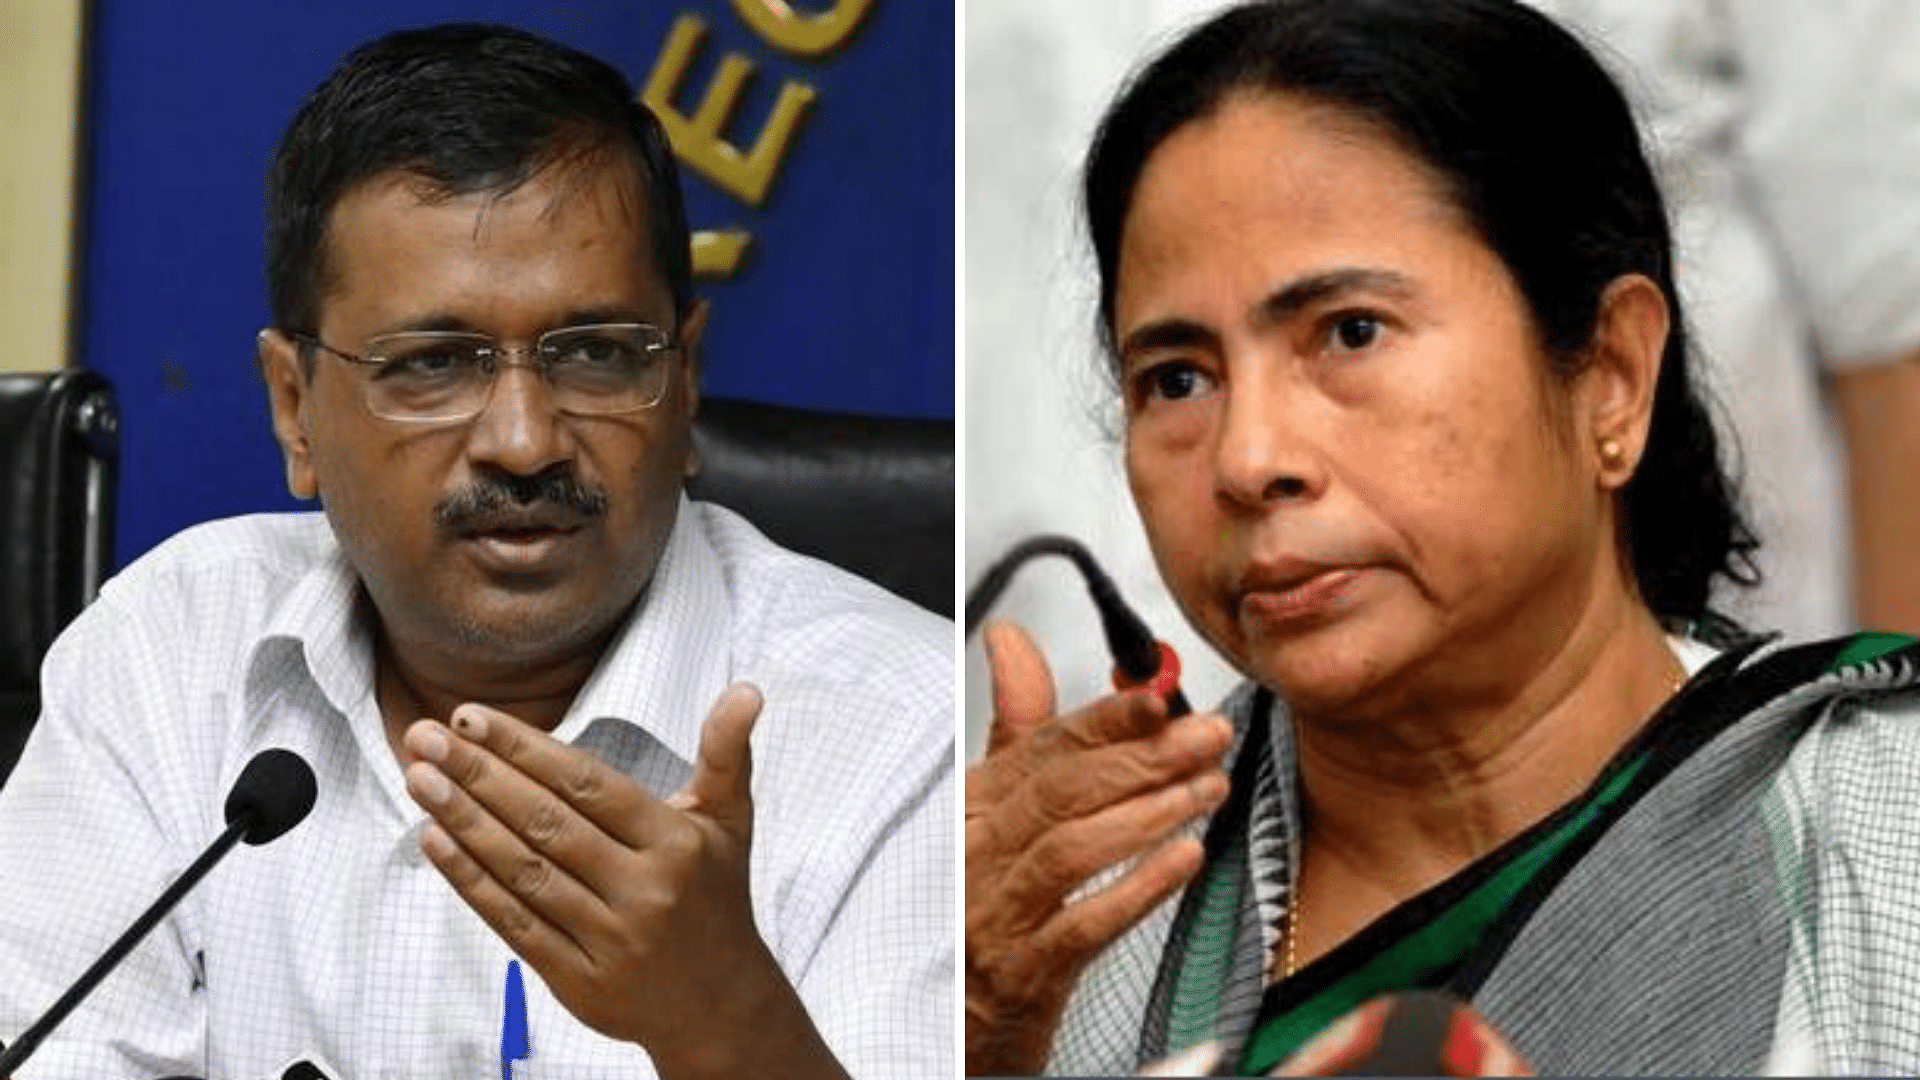 <div class="paragraphs"><p>West Bengal Chief Minister Mamata Banerjee met Delhi CM Arvind Kejriwal in the national capital on Friday, 29 April.</p></div>